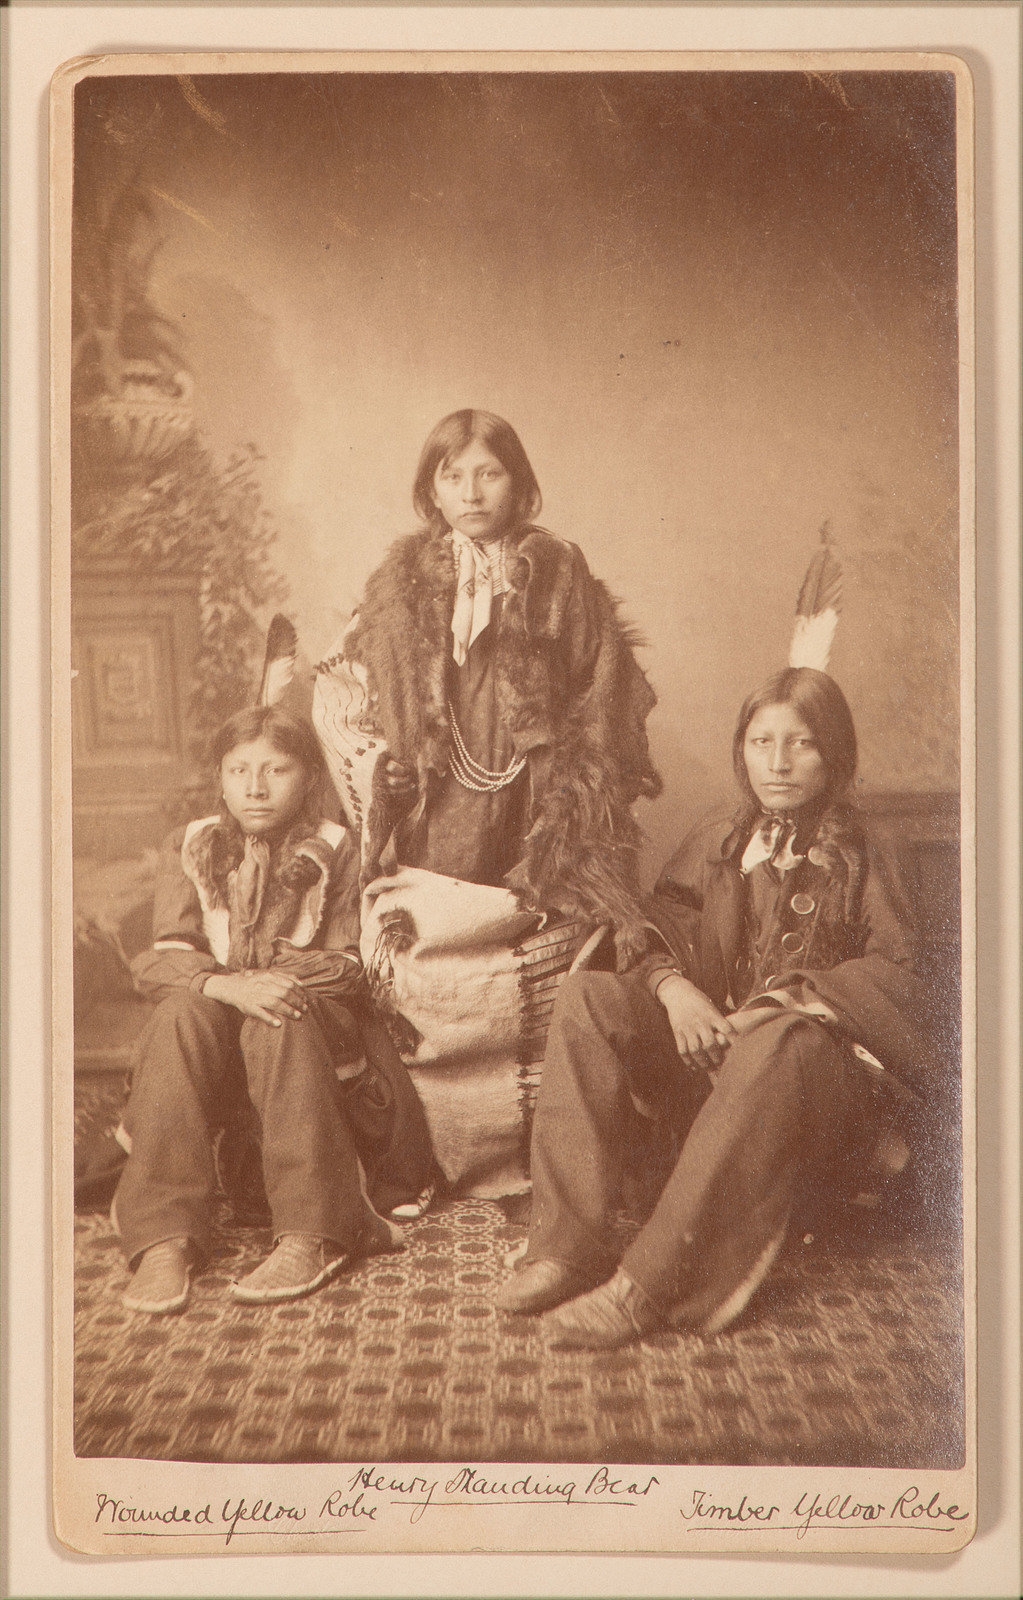 Artwork by John Nicholas Choate, Boudoir card featuring a trio of Santee Sioux students of Carlisle Indian School, identified on mount as Henry Standing Bear, Made of Boudoir card